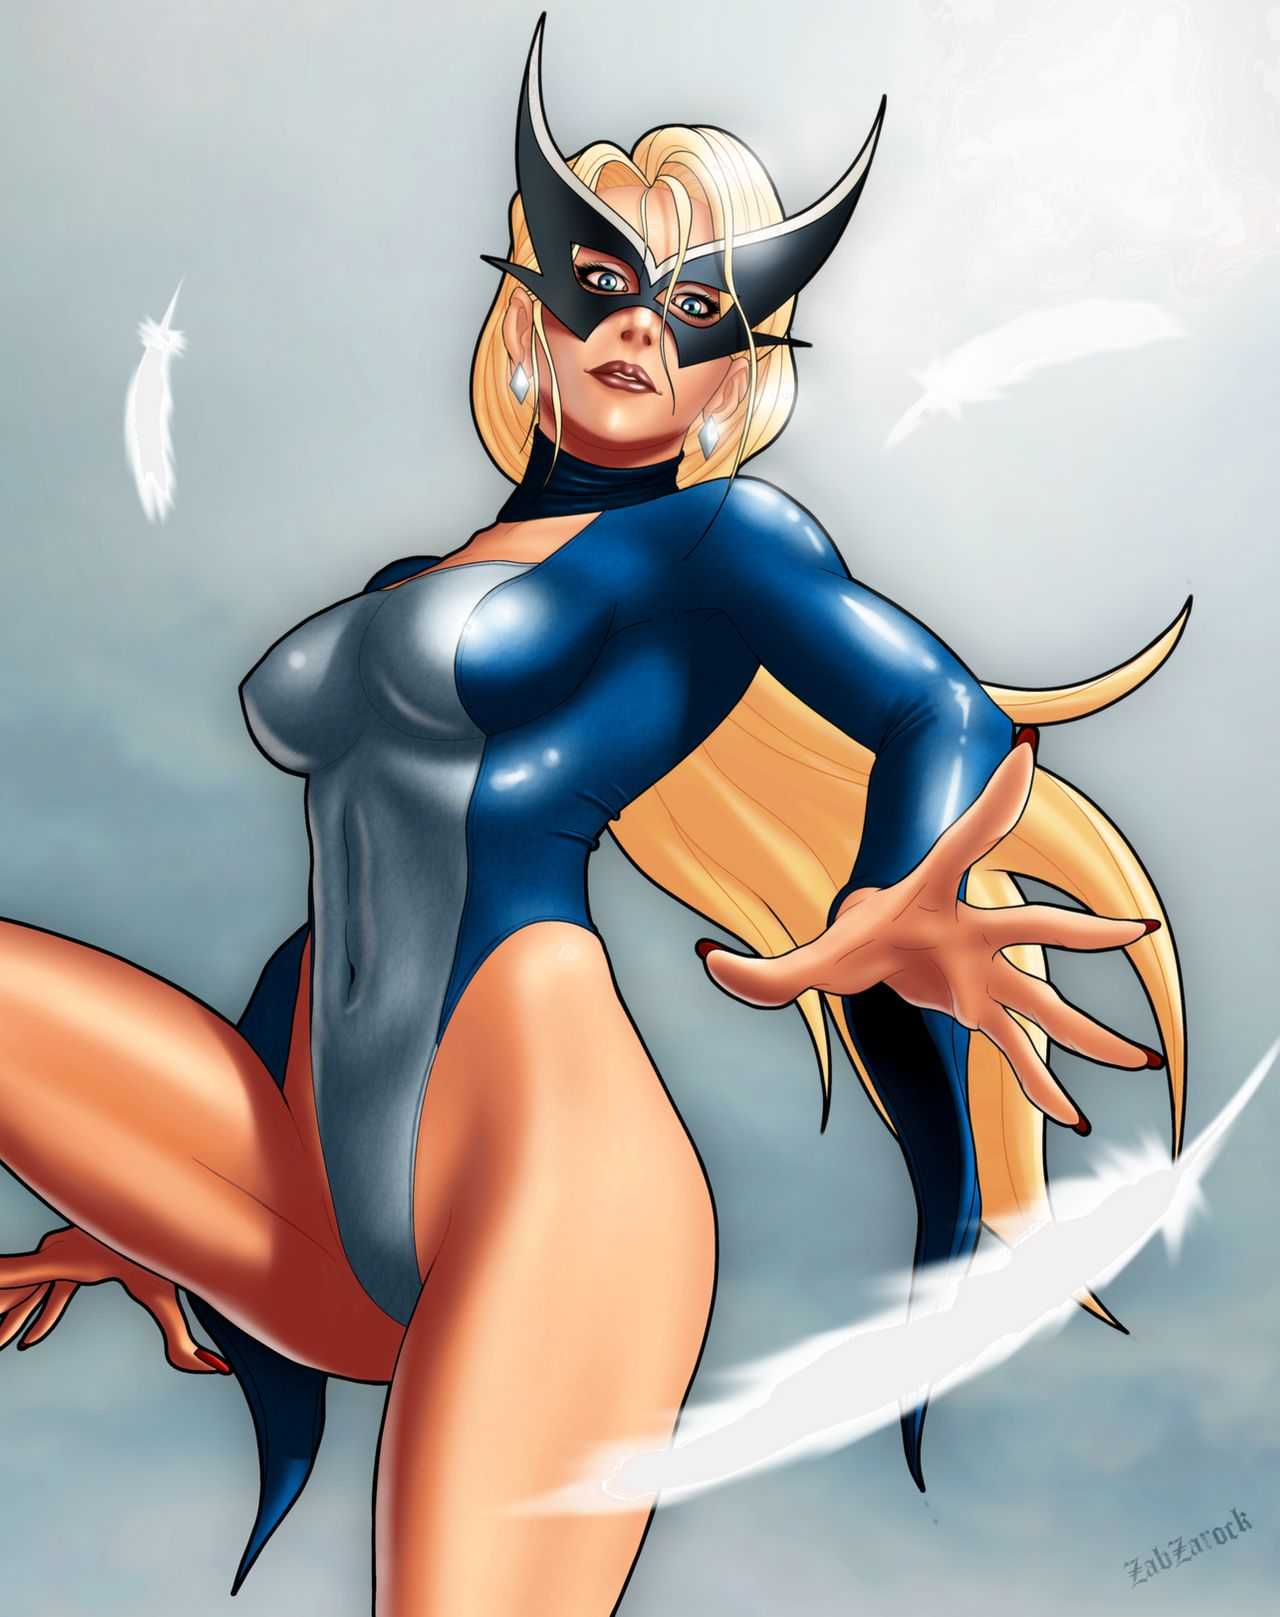 Nude Pictures Of Mockingbird Will Leave You Flabbergasted By Her Hot